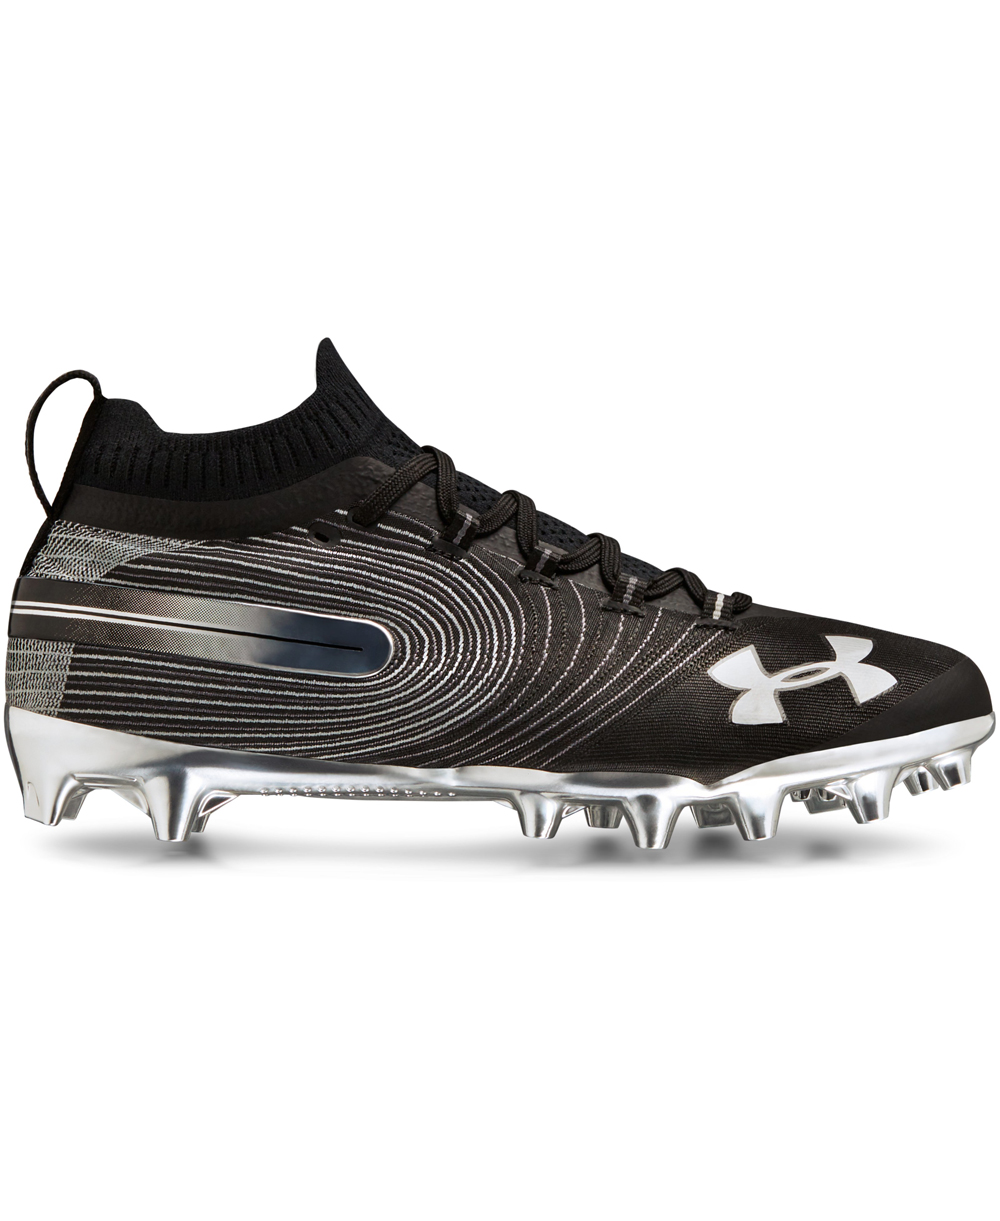 under armour nfl cleats